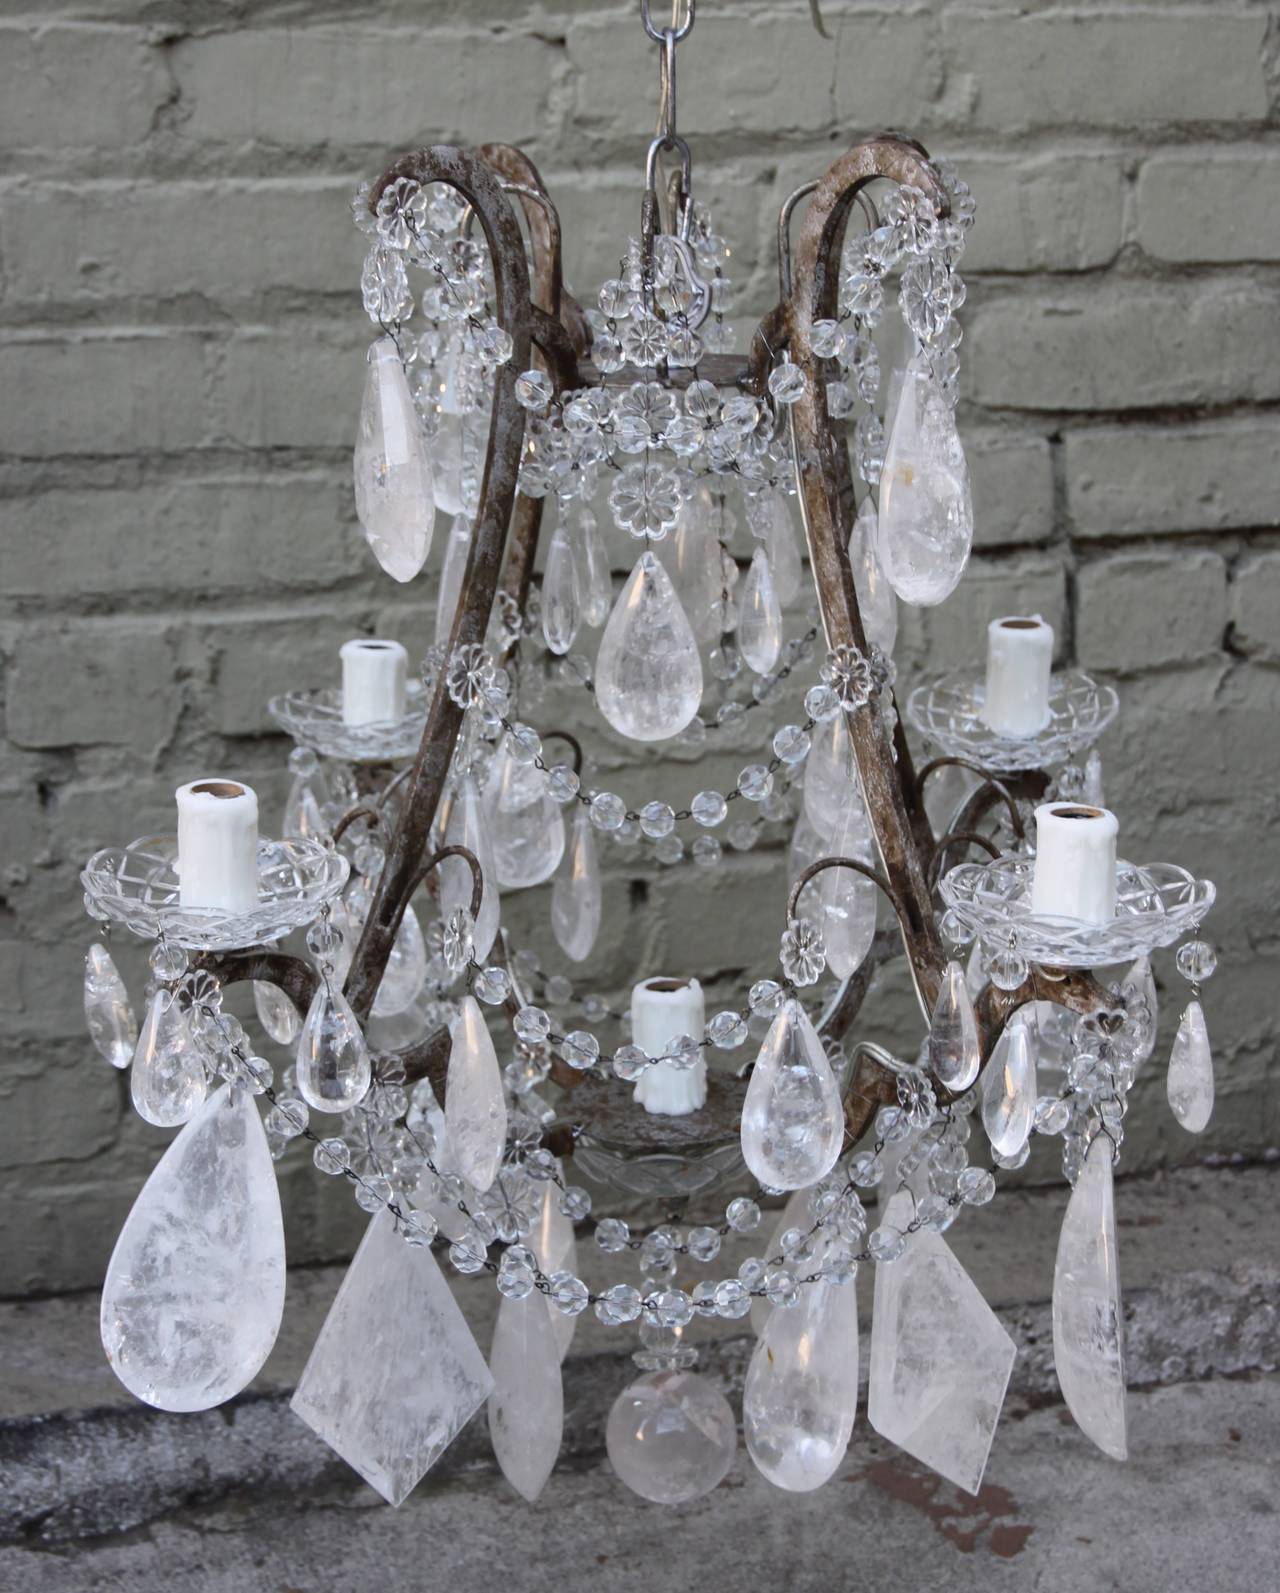 Five-light chandelier adorned with both tear drop and diamond-shaped rock crystals in varying sizes on a distressed silver finished frame. A rock crystal ball hangs from the bottom of the fixture. Newly wired with wax candle covers and in working